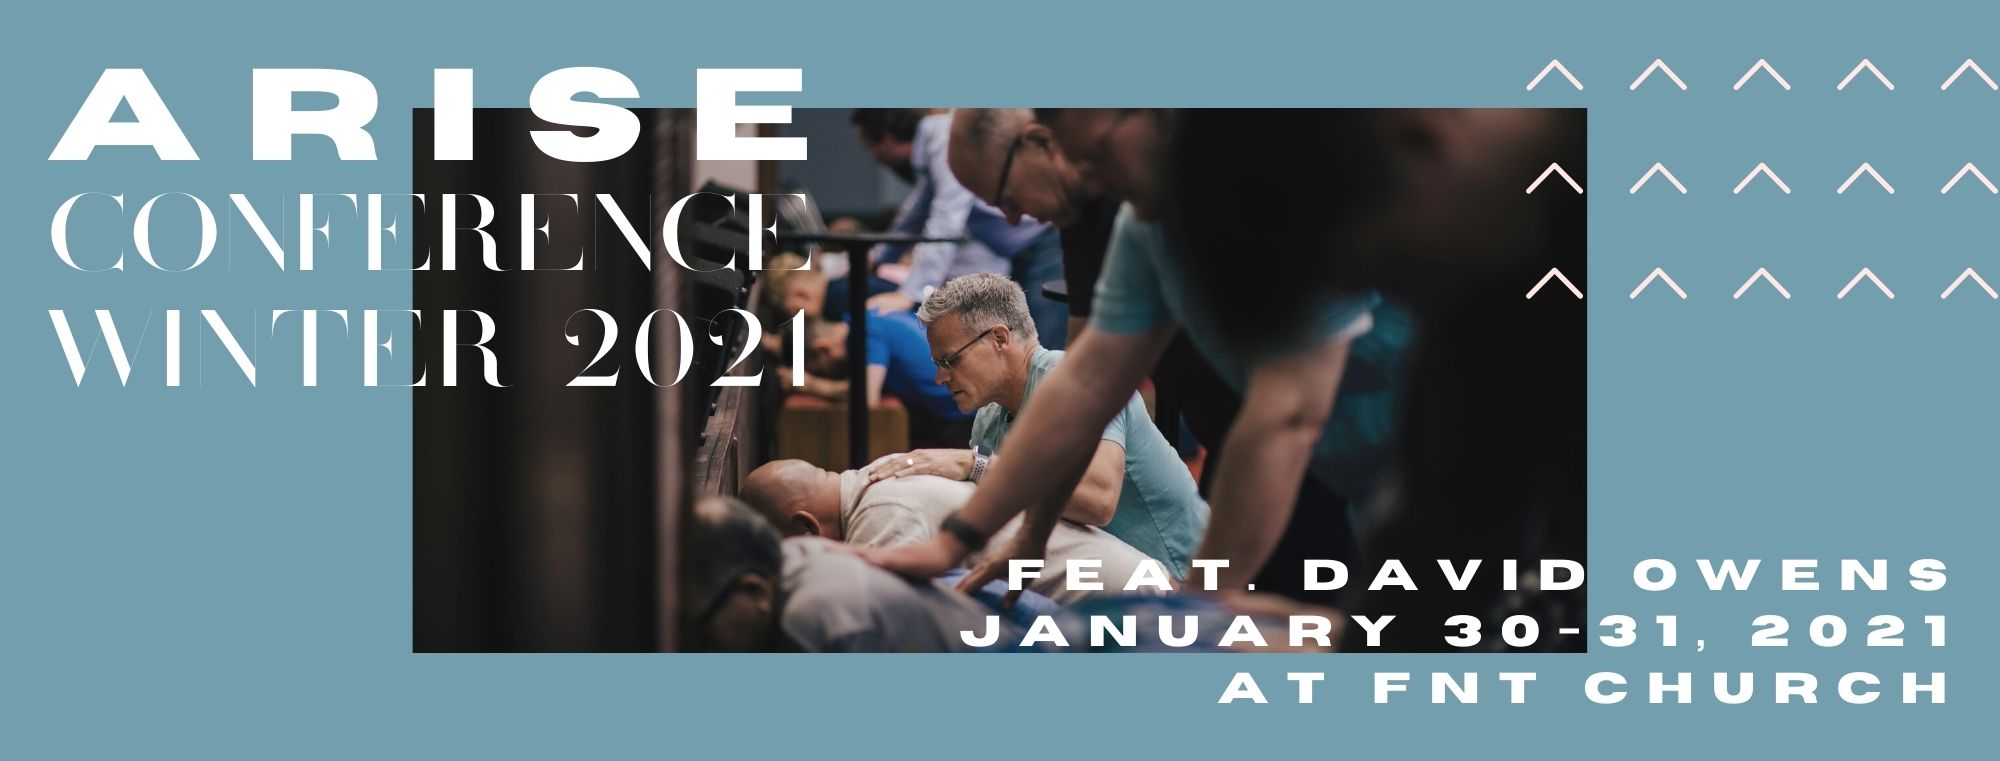 Arise Conference - David Owens